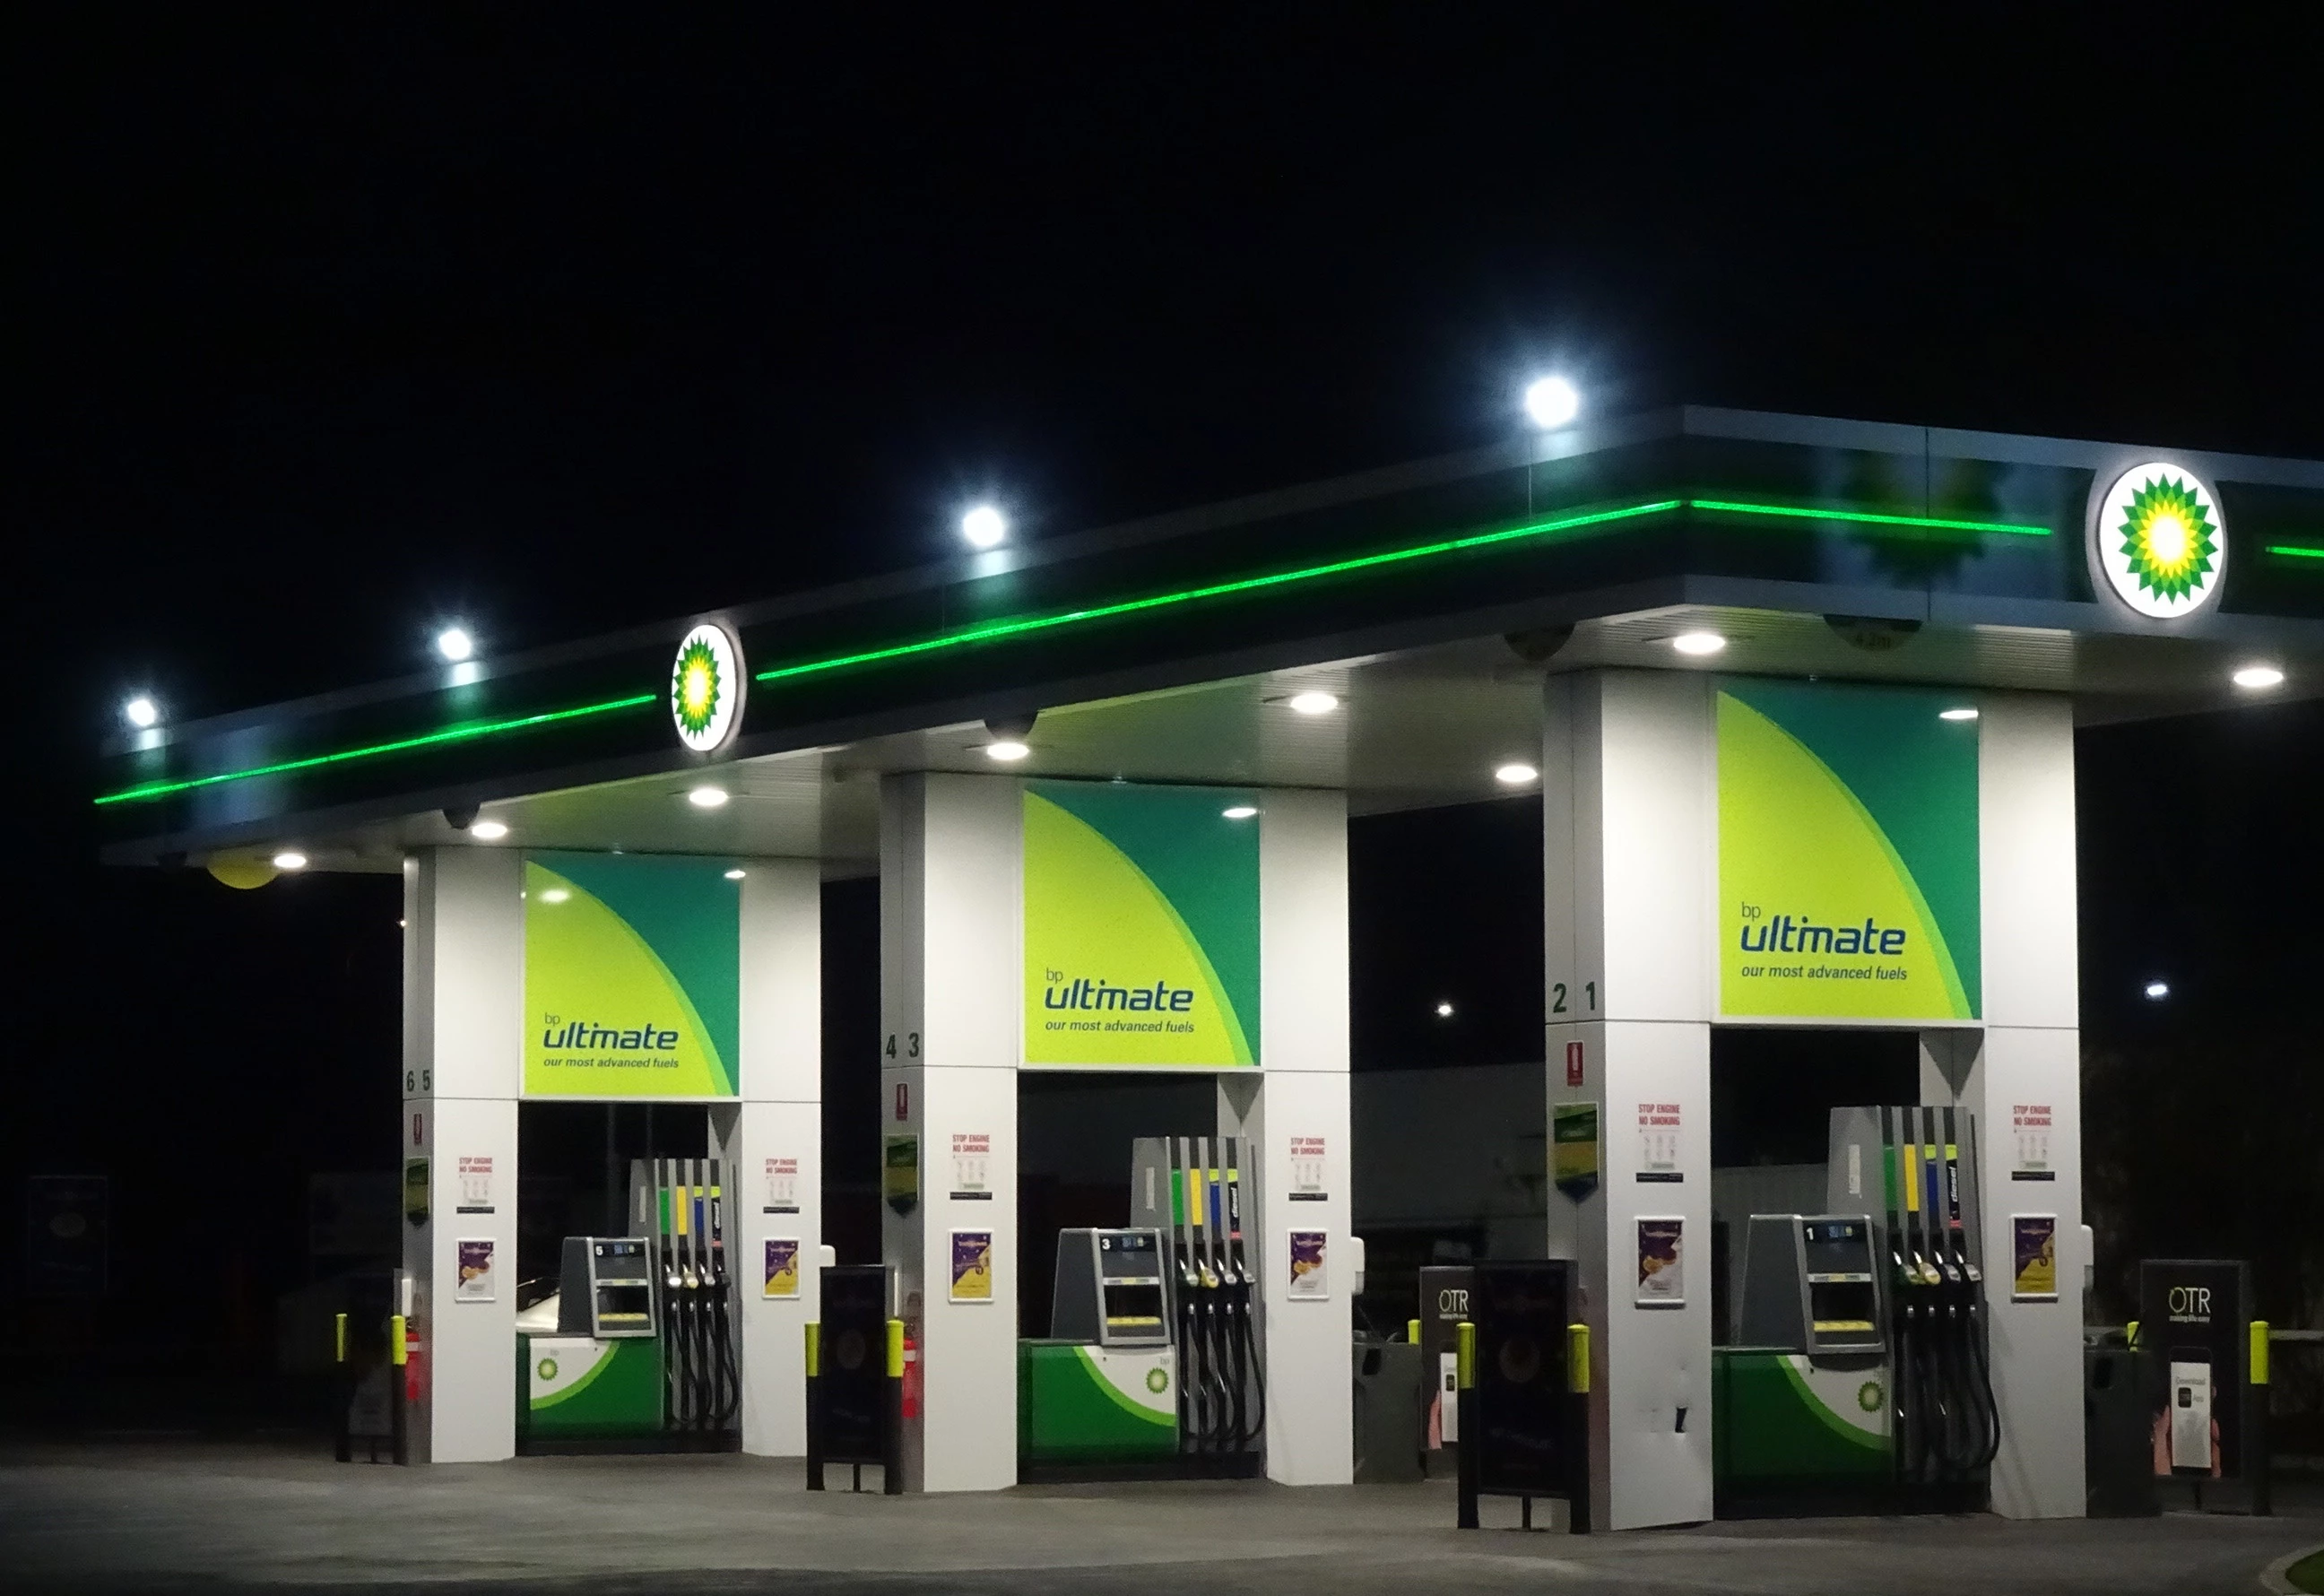 There are approximately 18,700 BP branded forecourts worldwide.